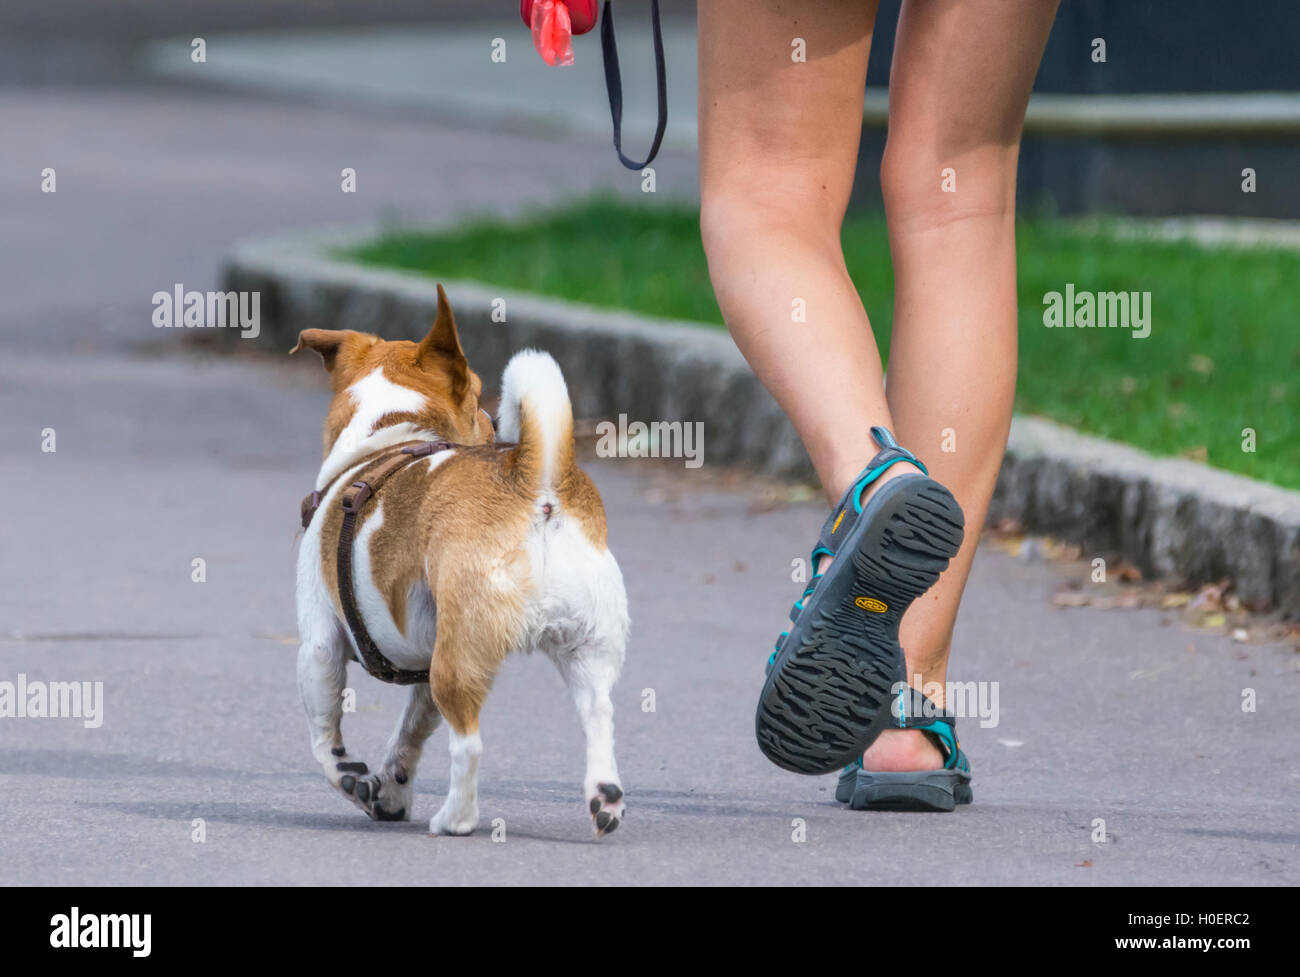 Walking a small dog, showing a lady's legs. Stock Photo